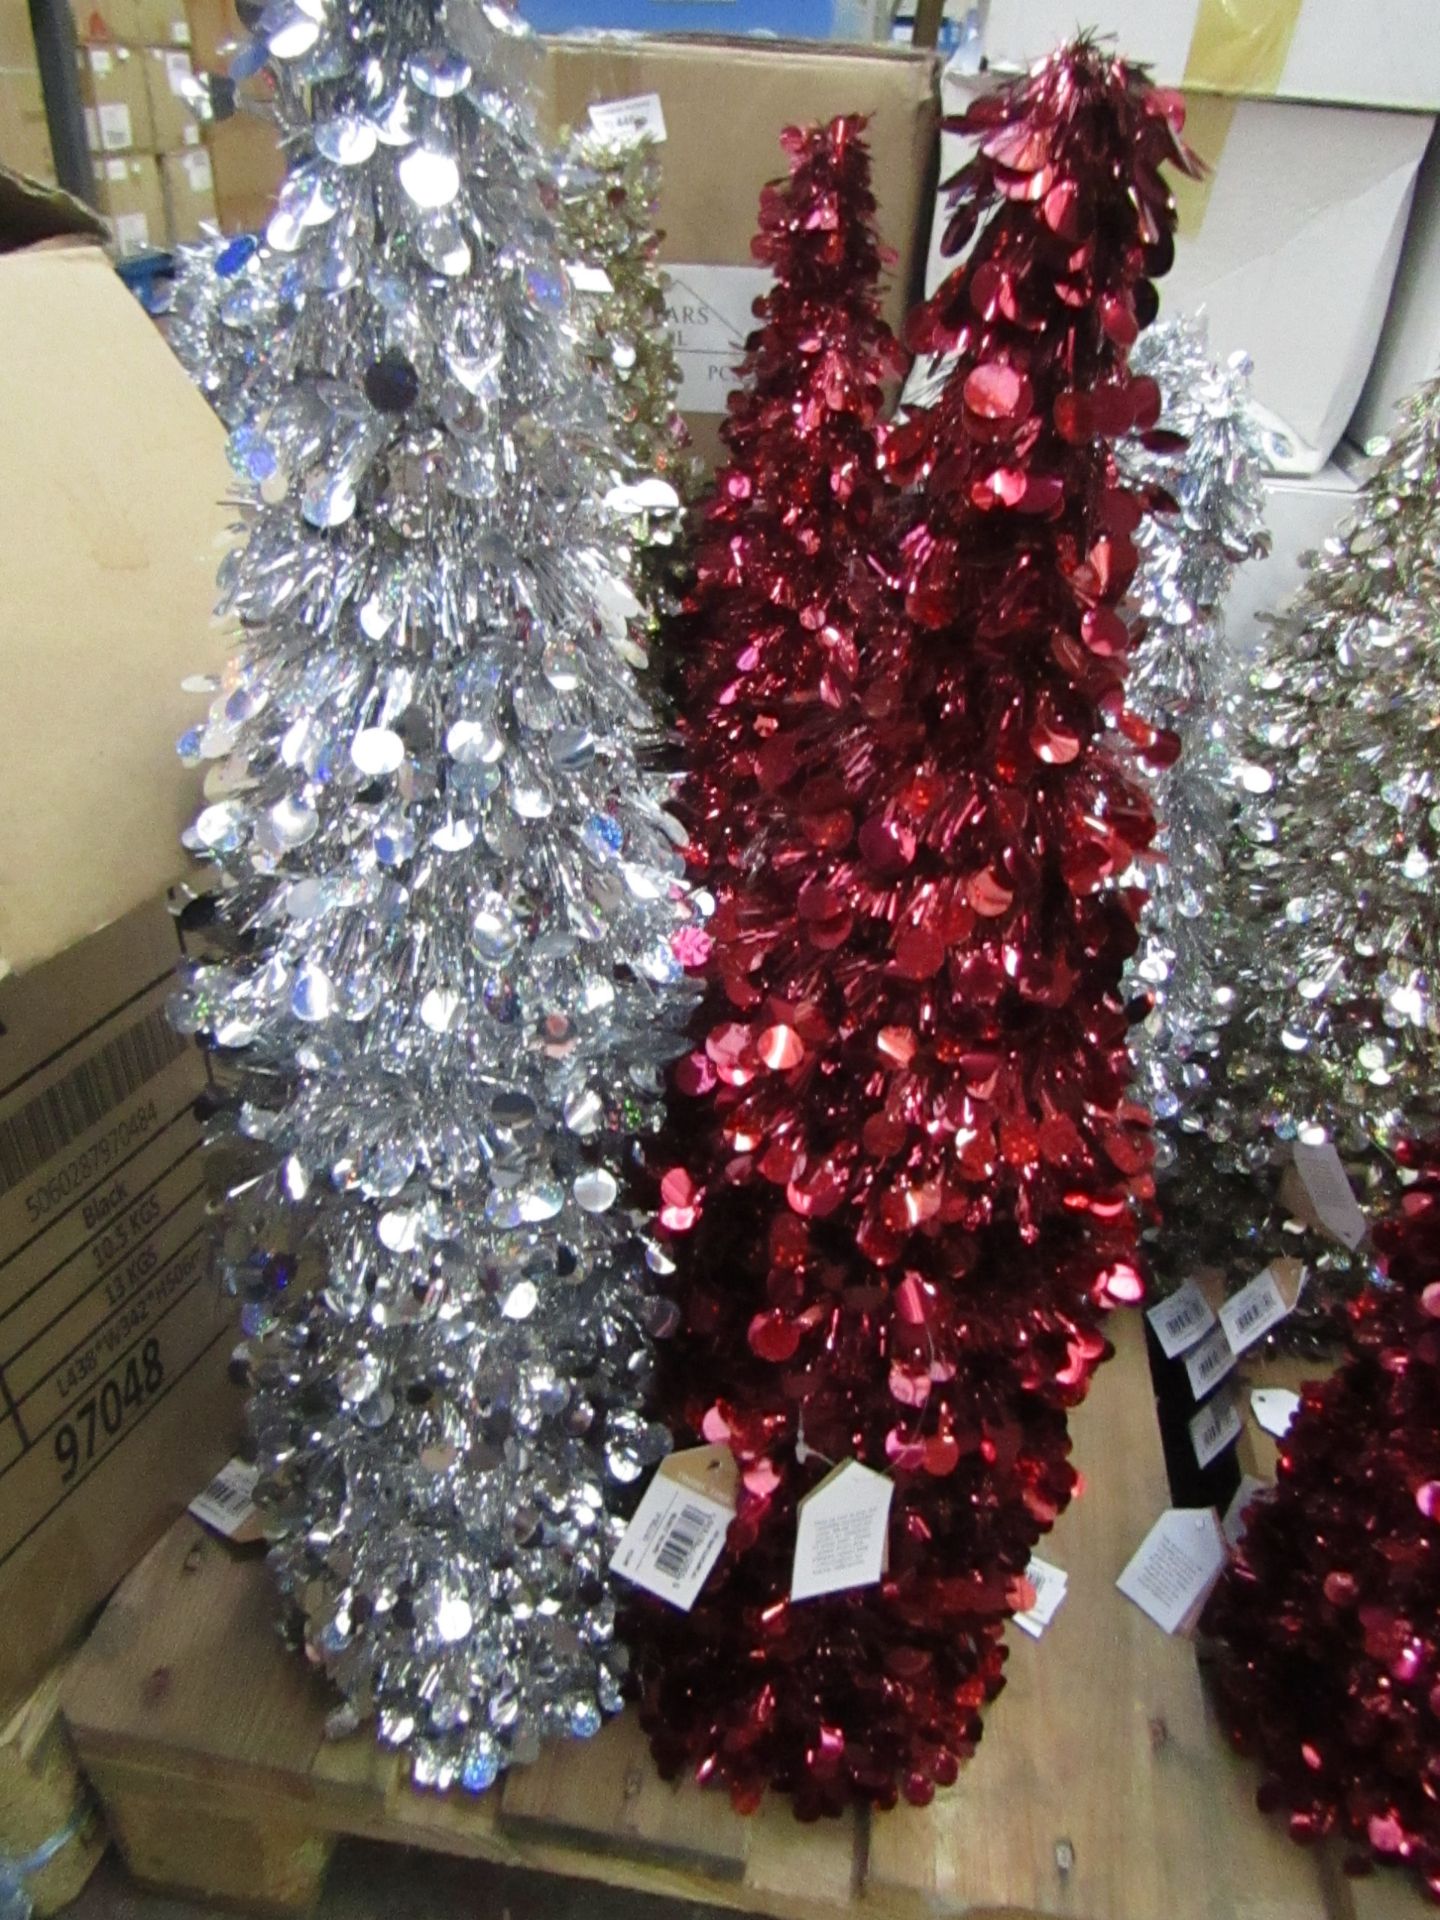 Approx 18x Tinsel trees, all new.